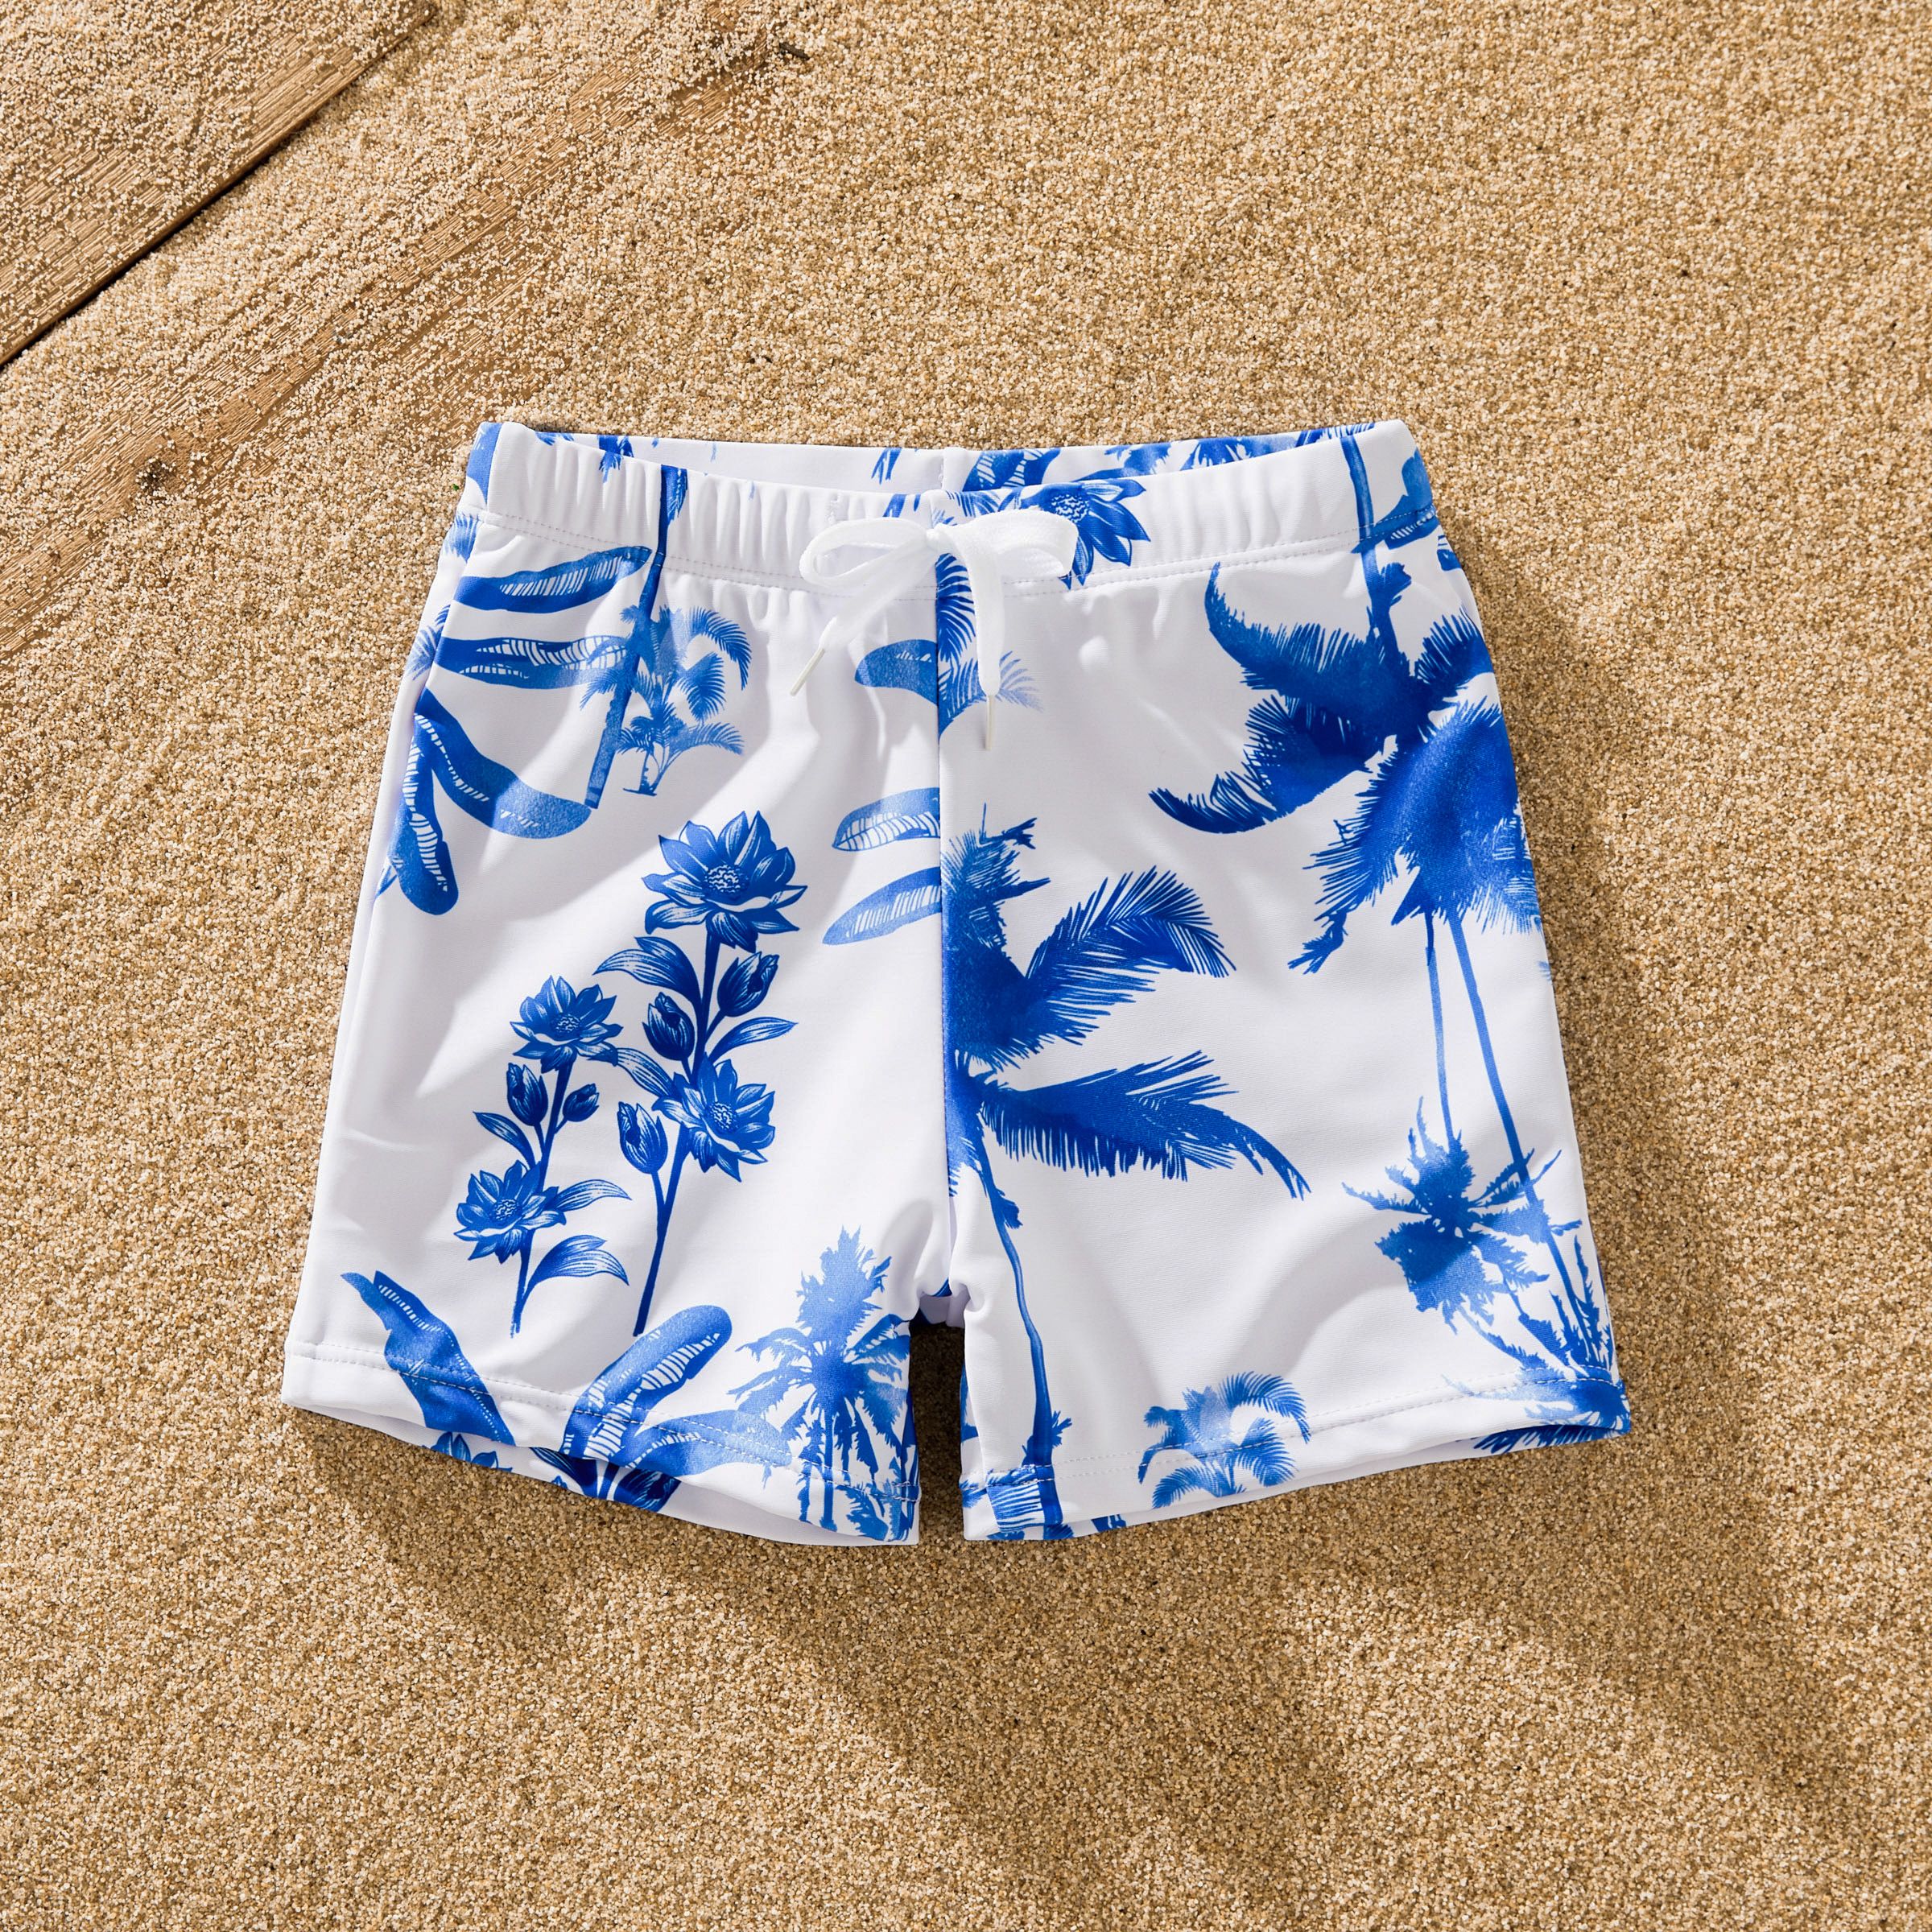 Family Matching Palm Leaf Print Swim Trunks Or One-Piece Ruffle V-Neck Swimsuit